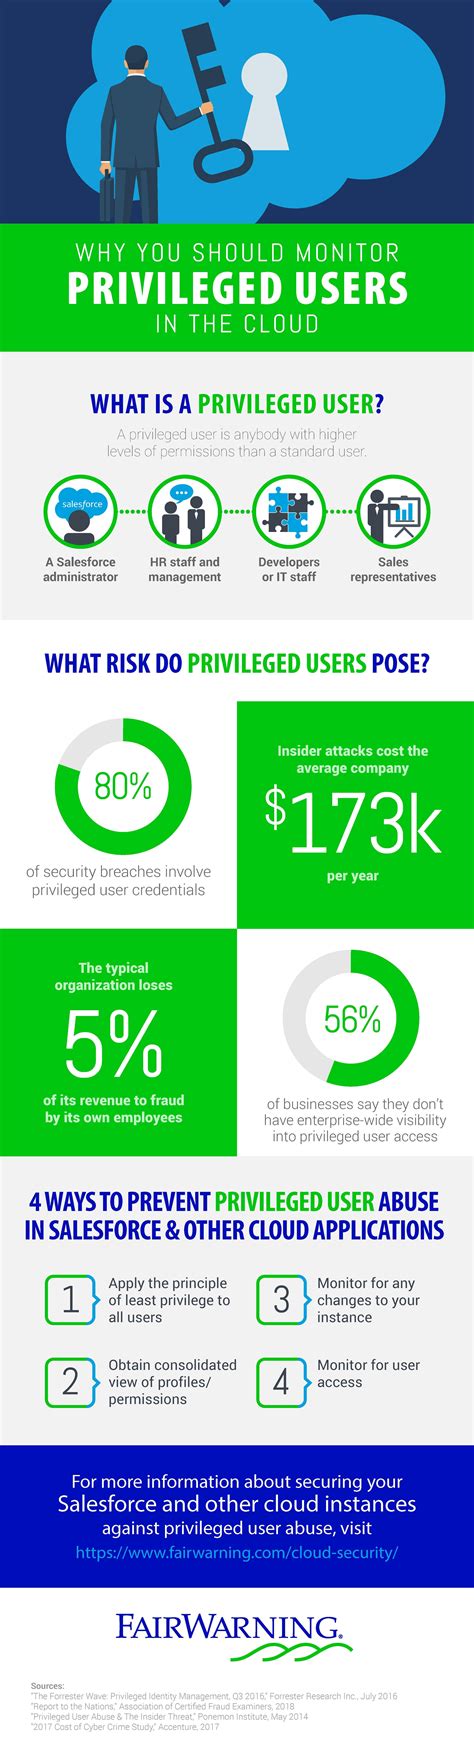 What is a privileged user?